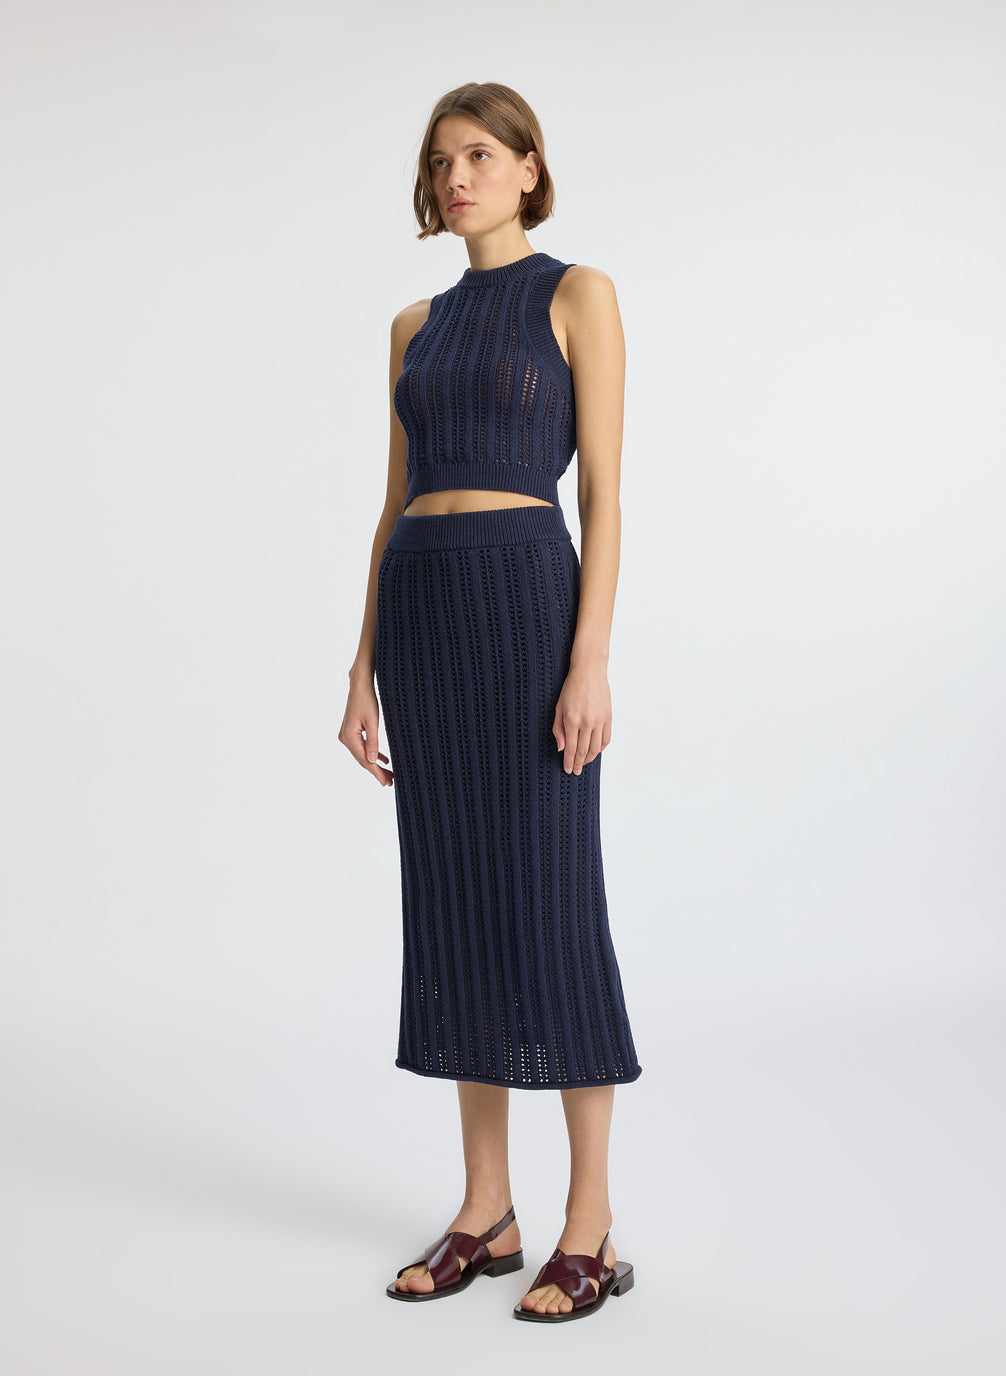 side view of woman wearing navy blue woven tank top and matching midi skirt